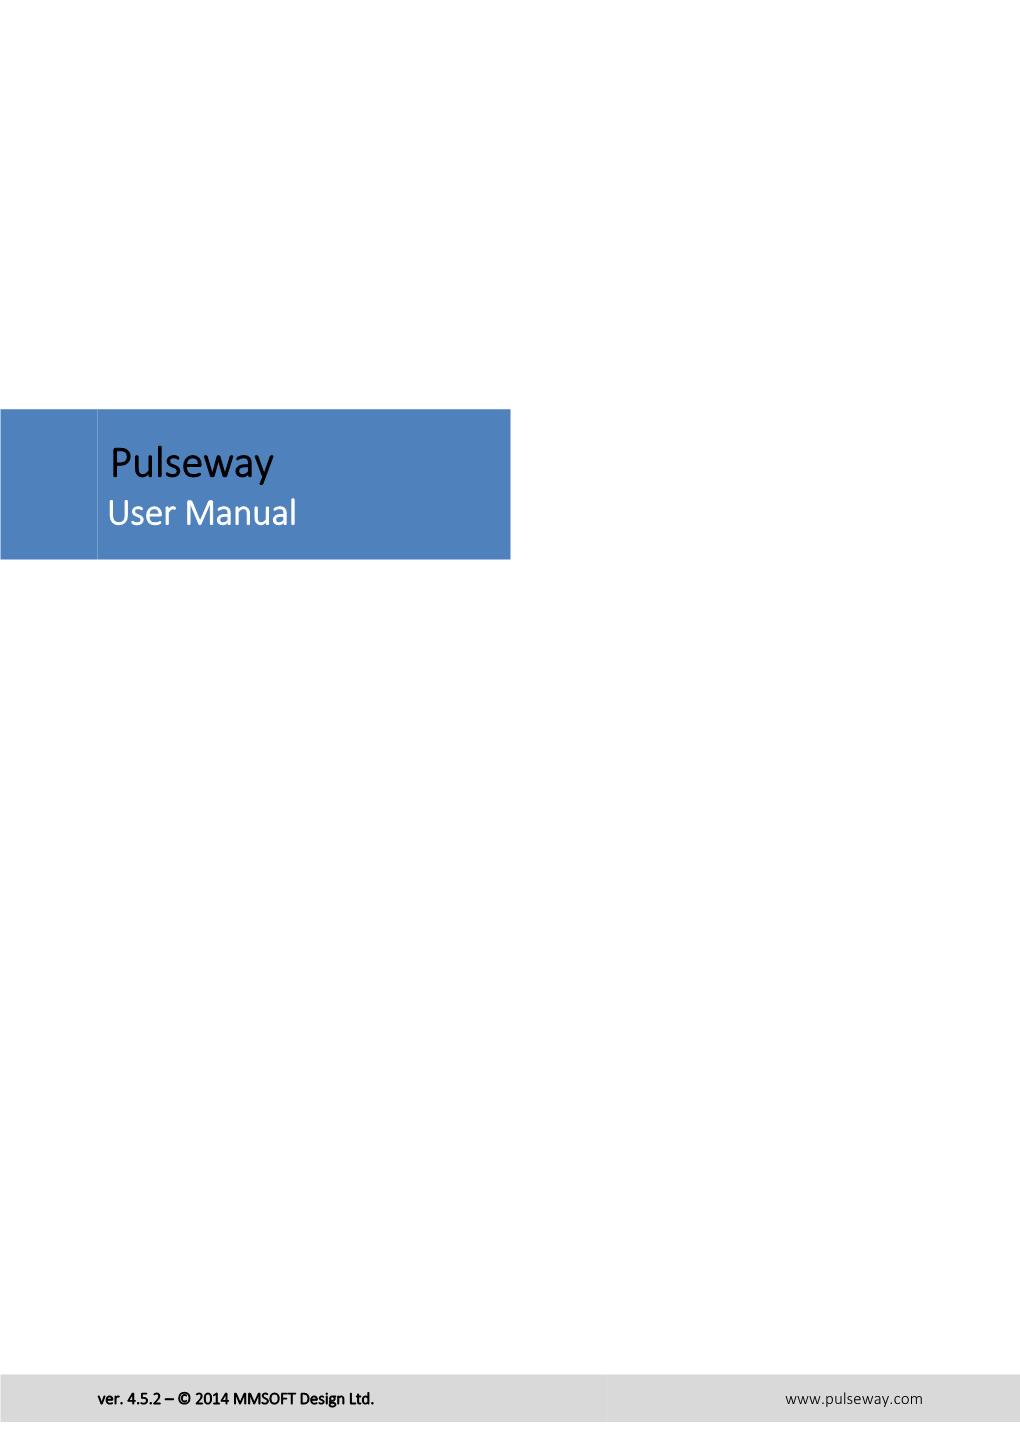 Pulseway User Manual Page 2 of 89